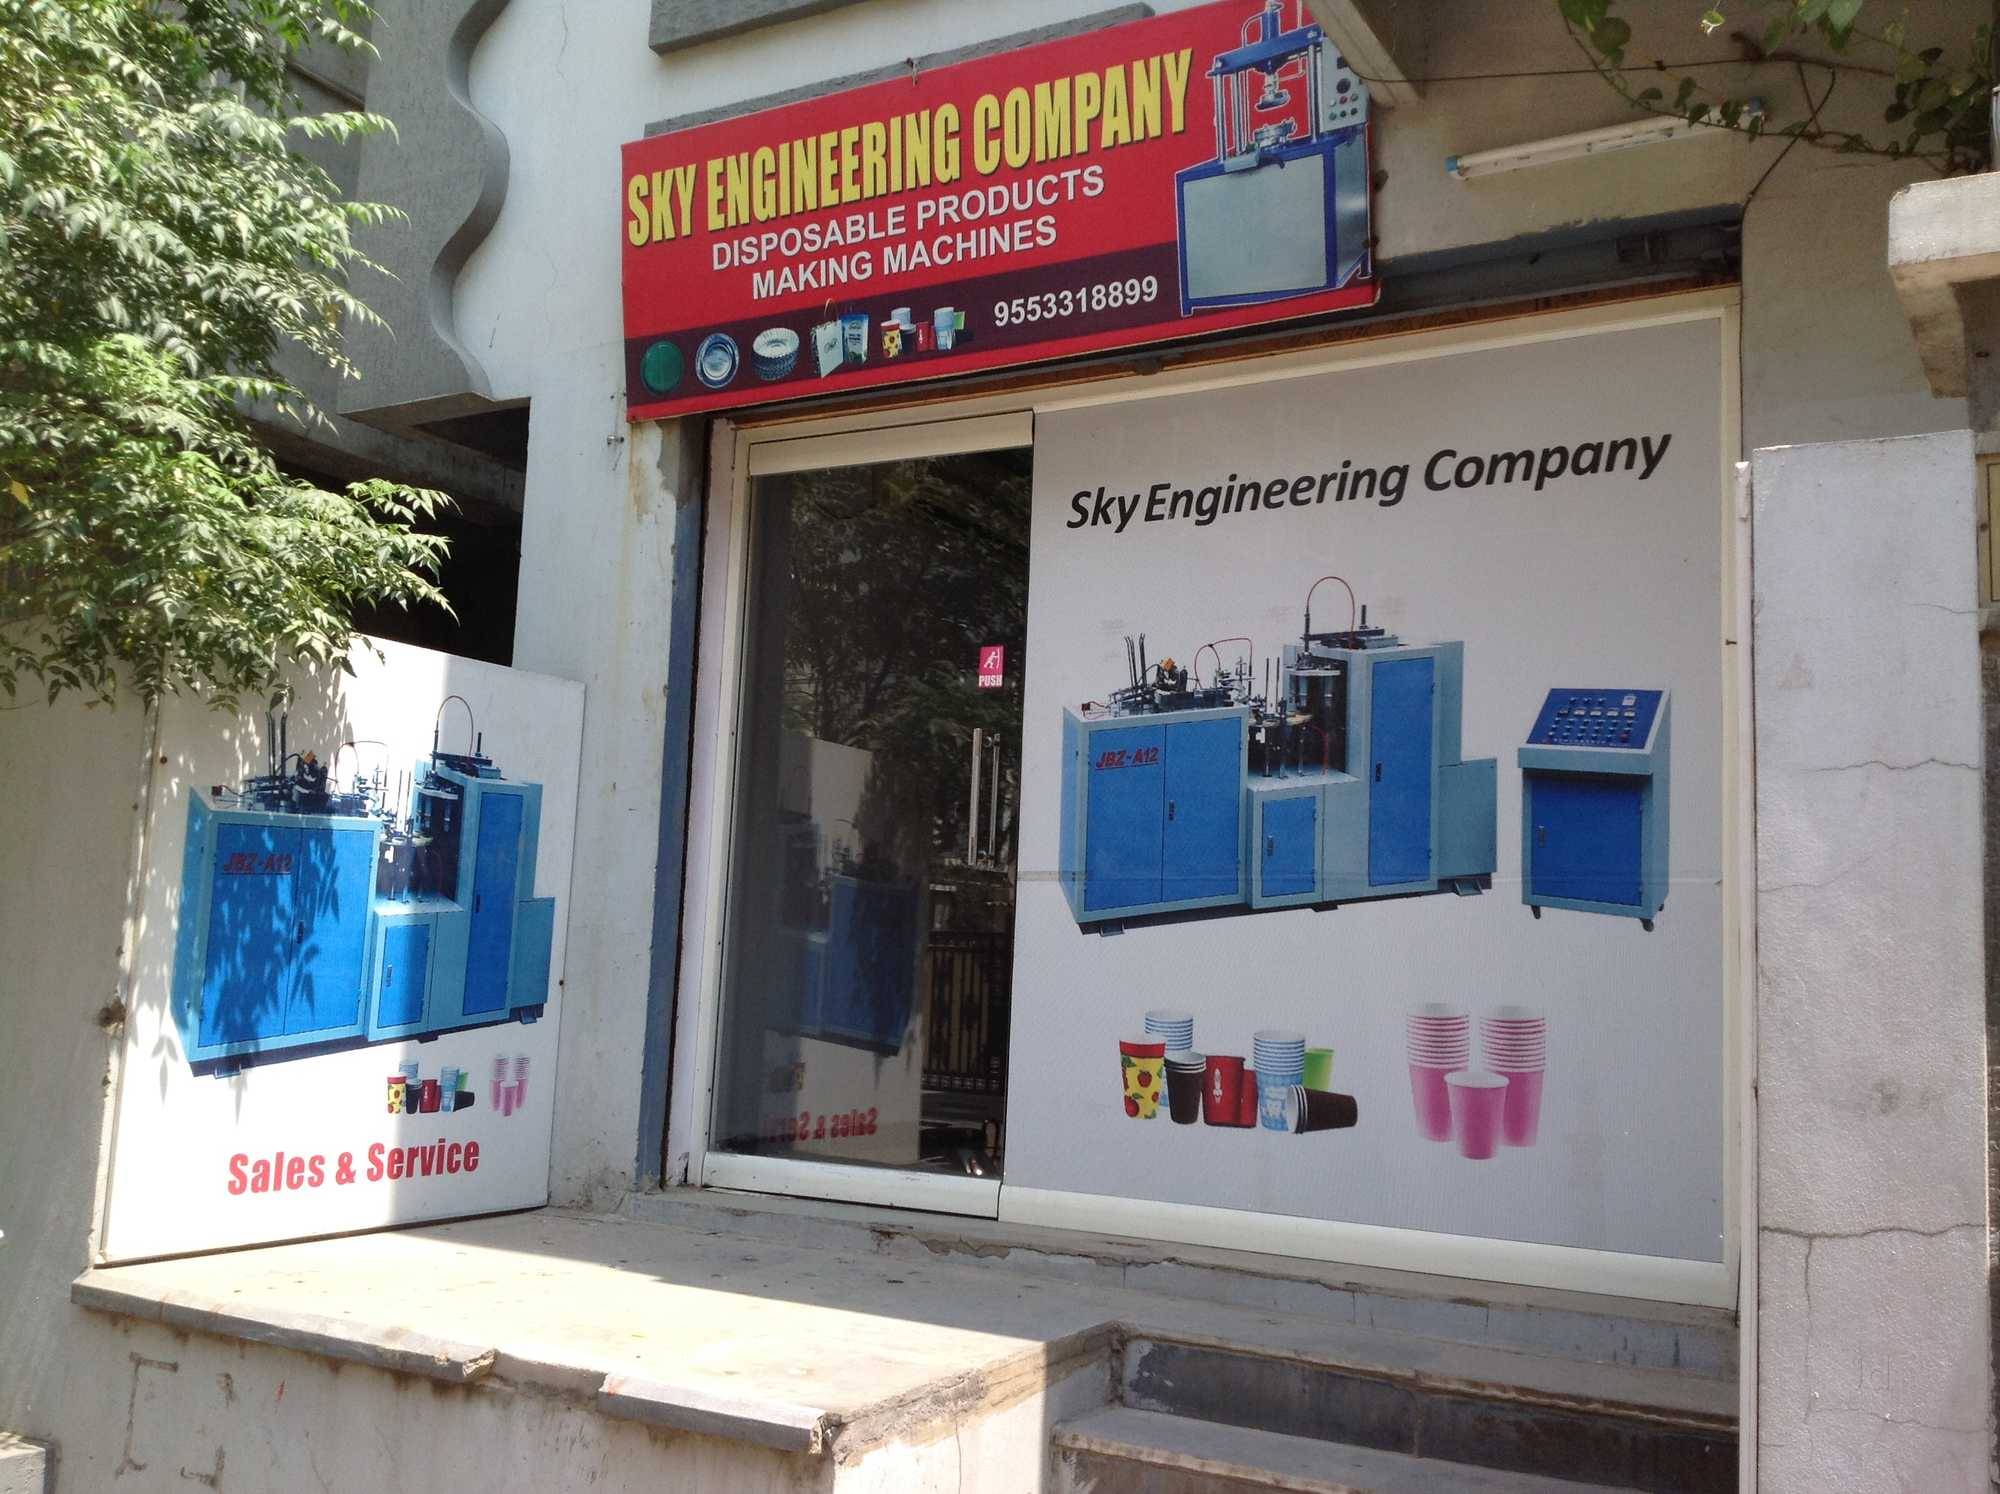 26272sky-engineering-company-uppal-hyderabad-paper-plate-raw-material-dealers-kdmbr.jpg